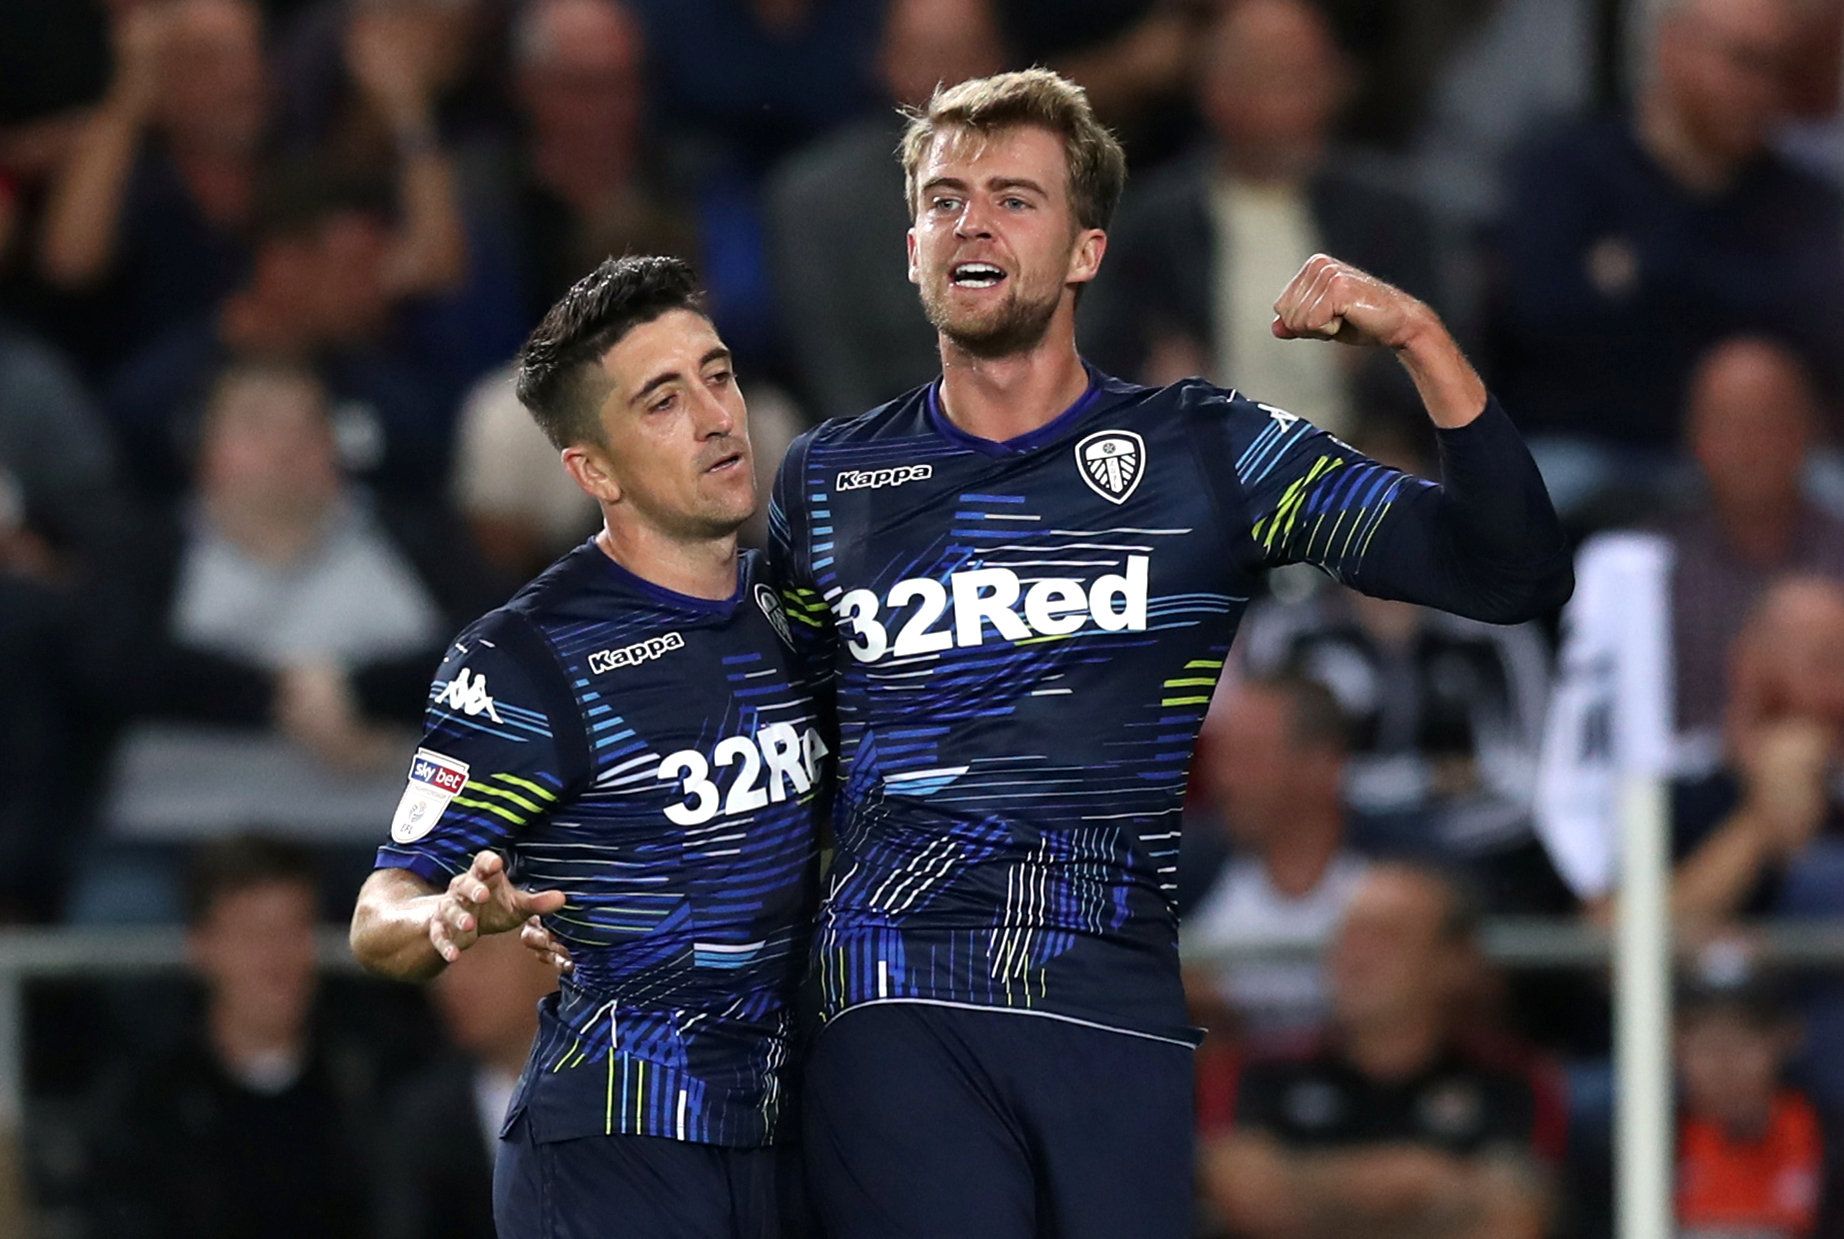 Soccer Football - Championship - Swansea City v Leeds United - Liberty Stadium, Swansea, Britain - August 21, 2018   Leeds United's Pablo Hernandez celebrates scoring their second goal with Patrick Bamford   Action Images/Peter Cziborra    EDITORIAL USE ONLY. No use with unauthorized audio, video, data, fixture lists, club/league logos or 